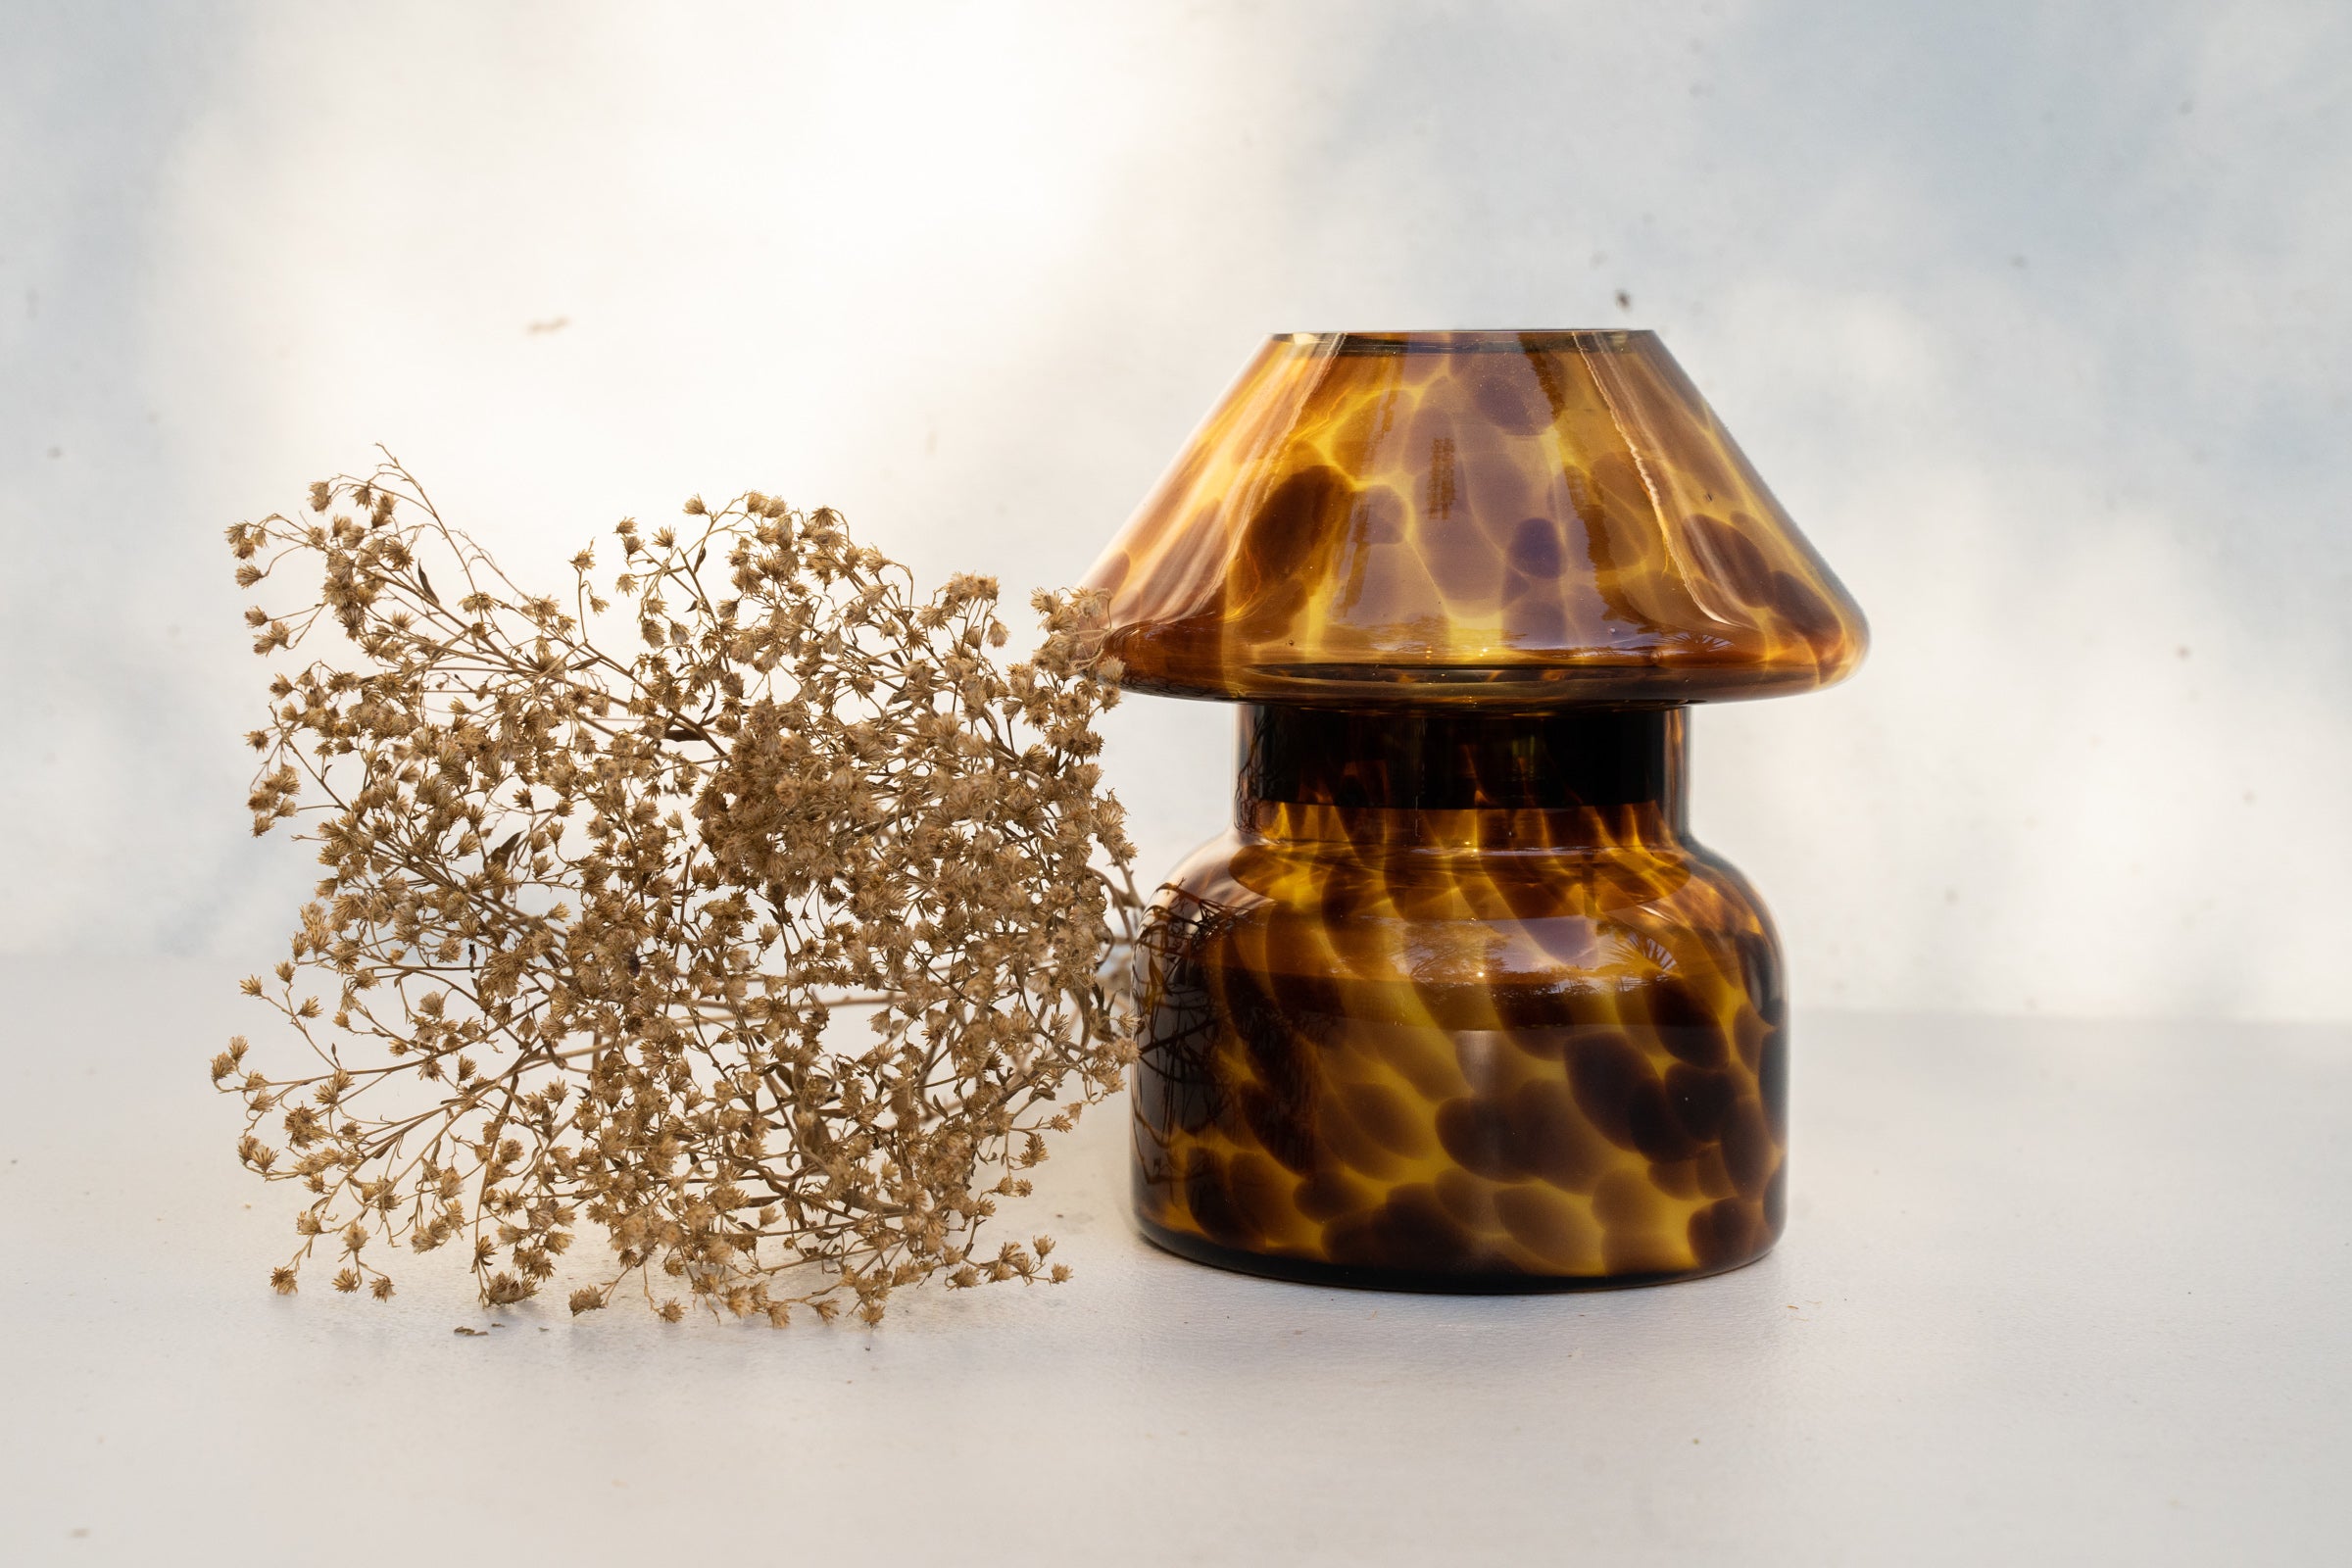 Mushroom candle lamp with light and dark brown spots on tan coloured glass. Leopard candle lamp is filled with 100% soy wax next to dried flowers.